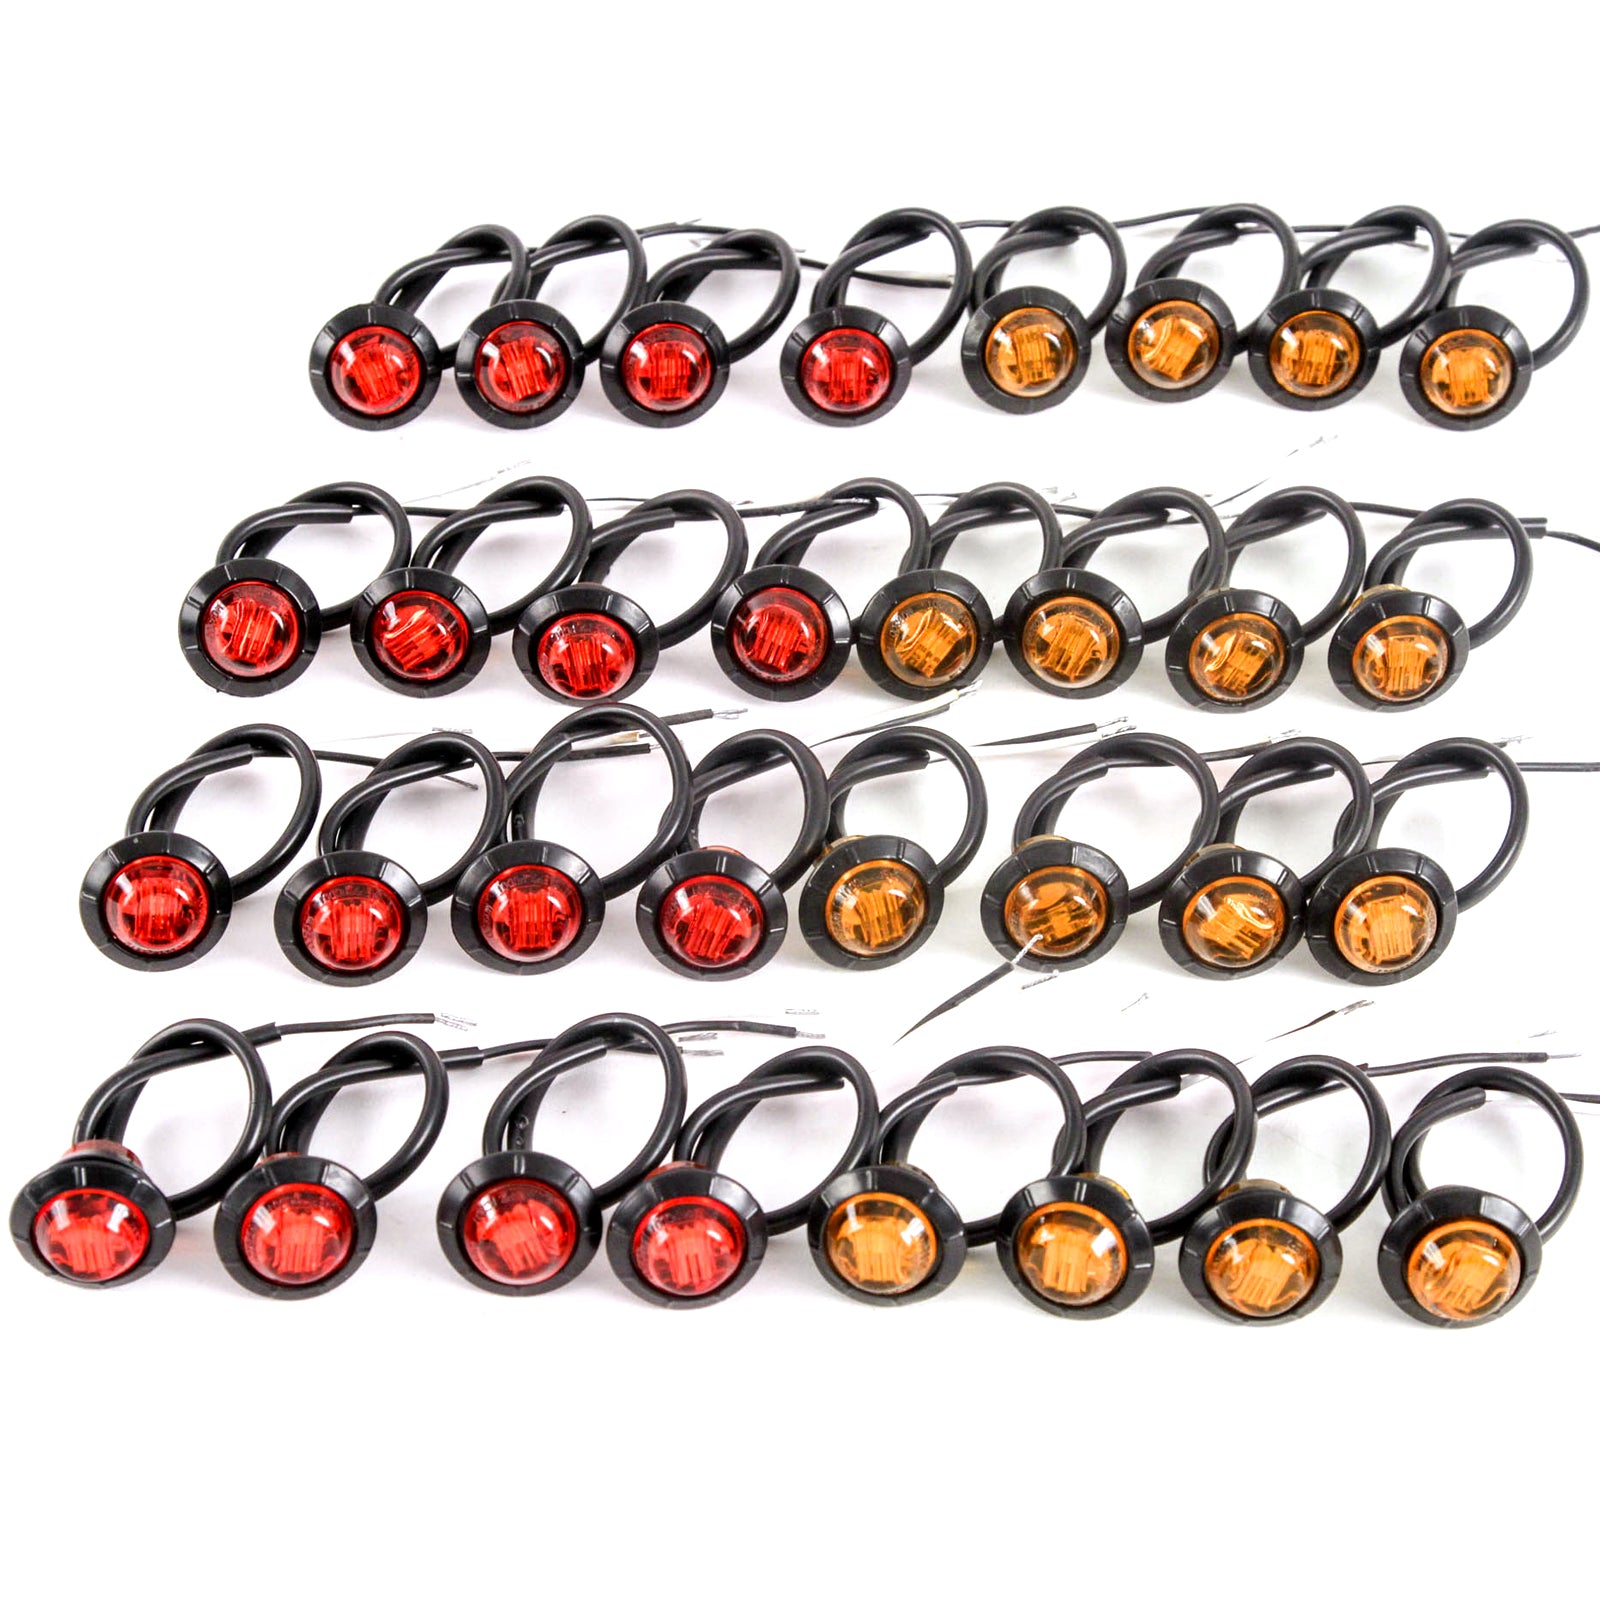 16) 3/4 Inches Amber & Red LED Clearance Side Marker Lights Truck Trailer Pickup Flush